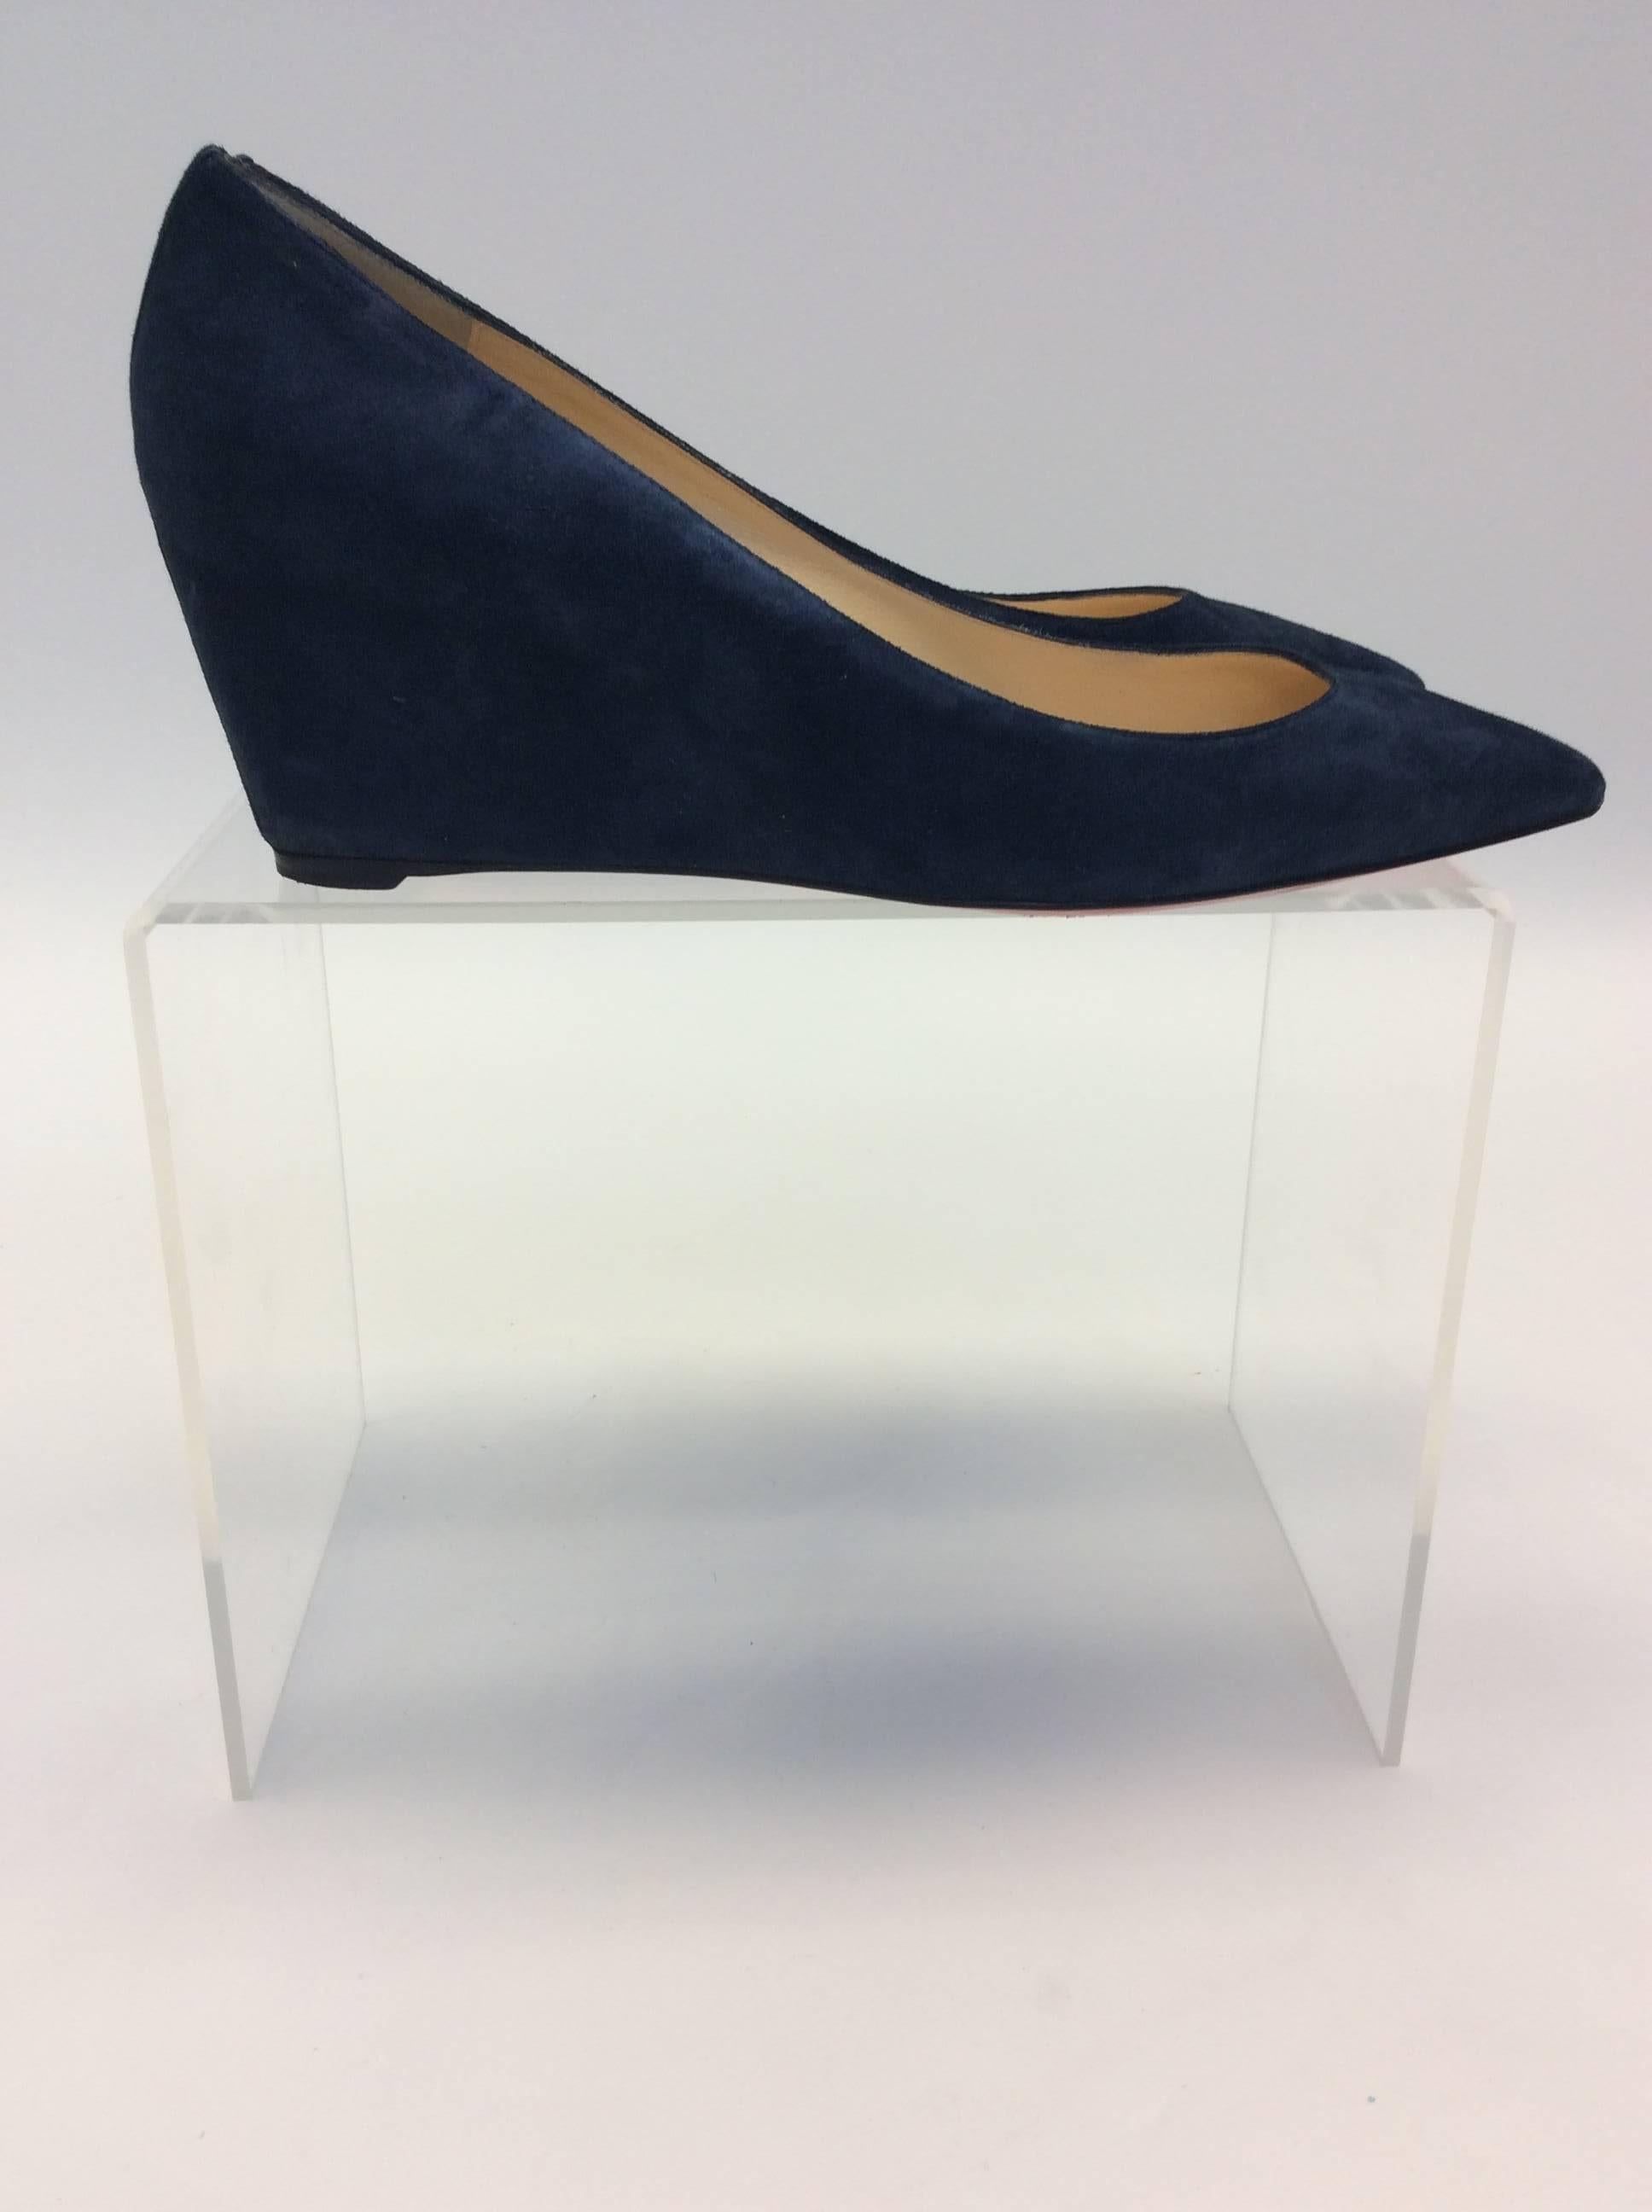 Navy Christian Louboutin Suede Wedge 
$399
Size 40.5
Suede material, almond style toe

